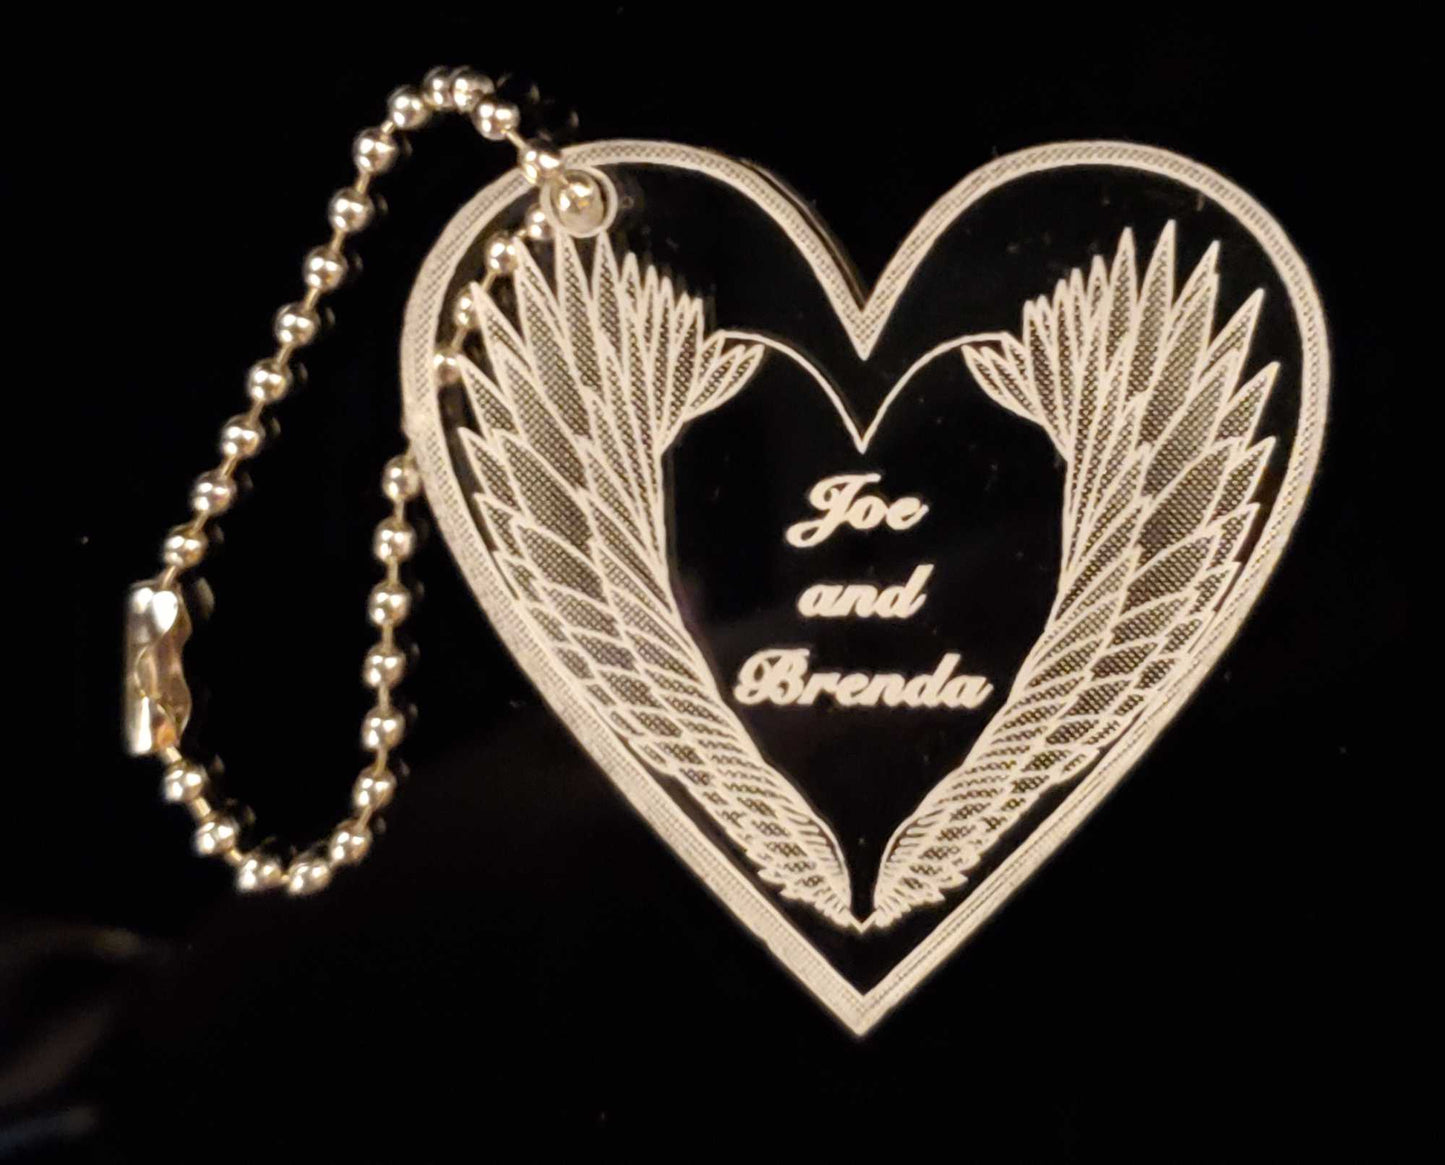 heart shaped acrylic keychain in heart shape with angel wing design engraved with names and a small chain attached